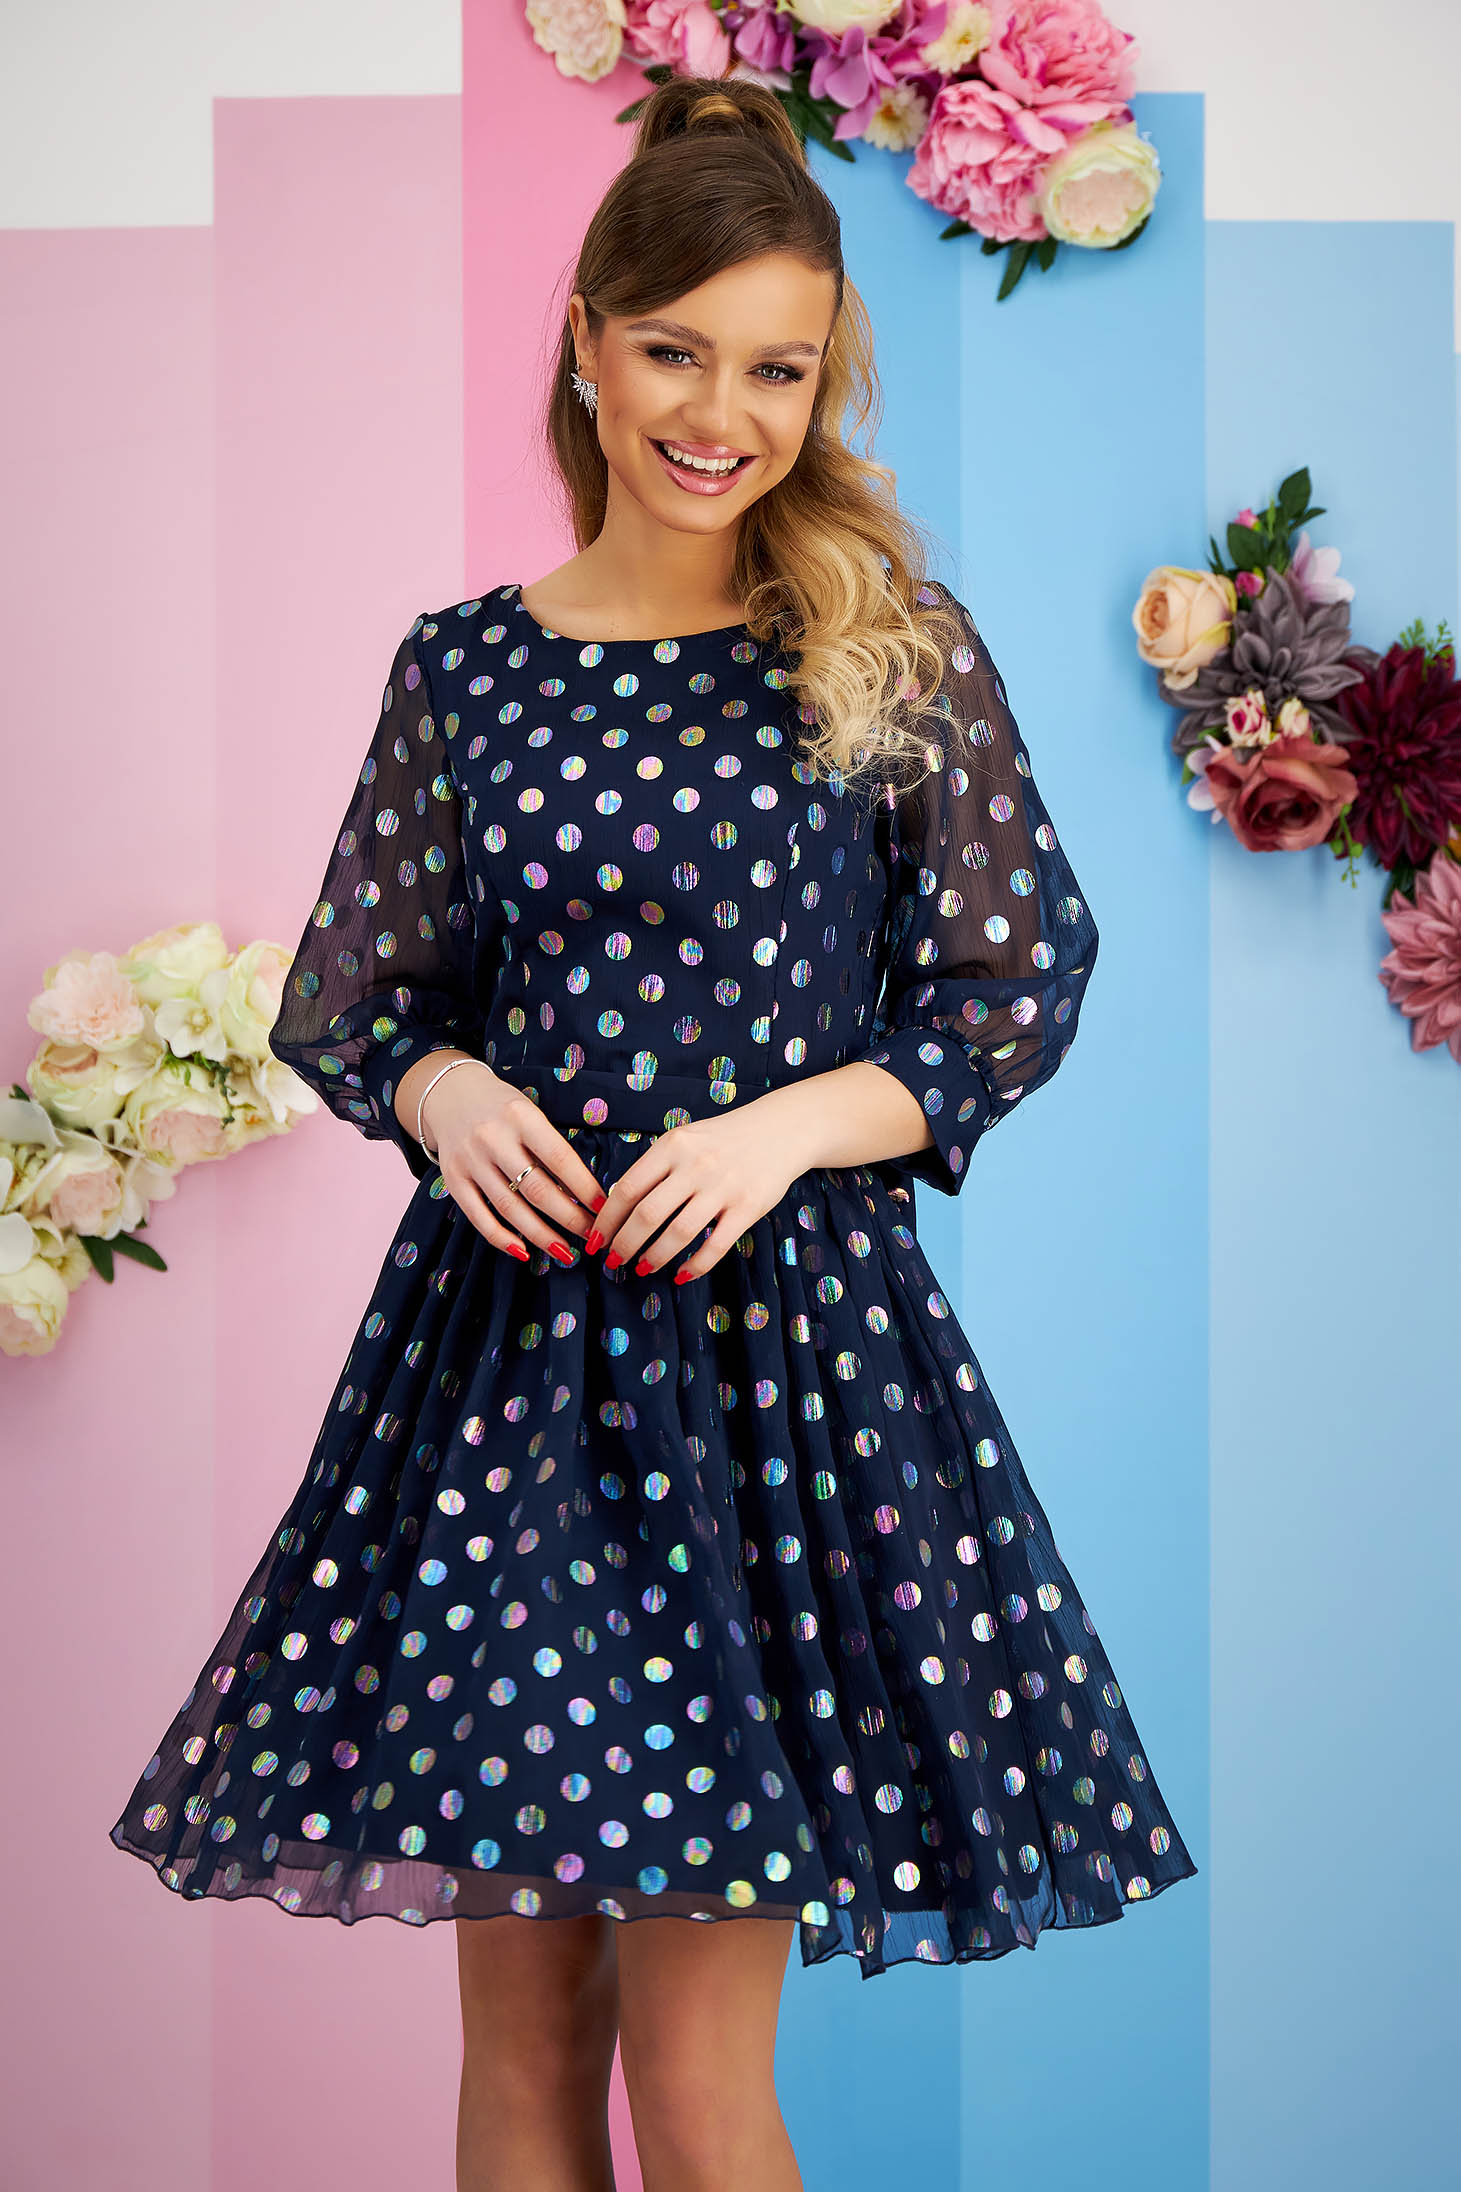 Veil dress in A-line with polka dots accessorized with belt and bow - StarShinerS 6 - StarShinerS.com